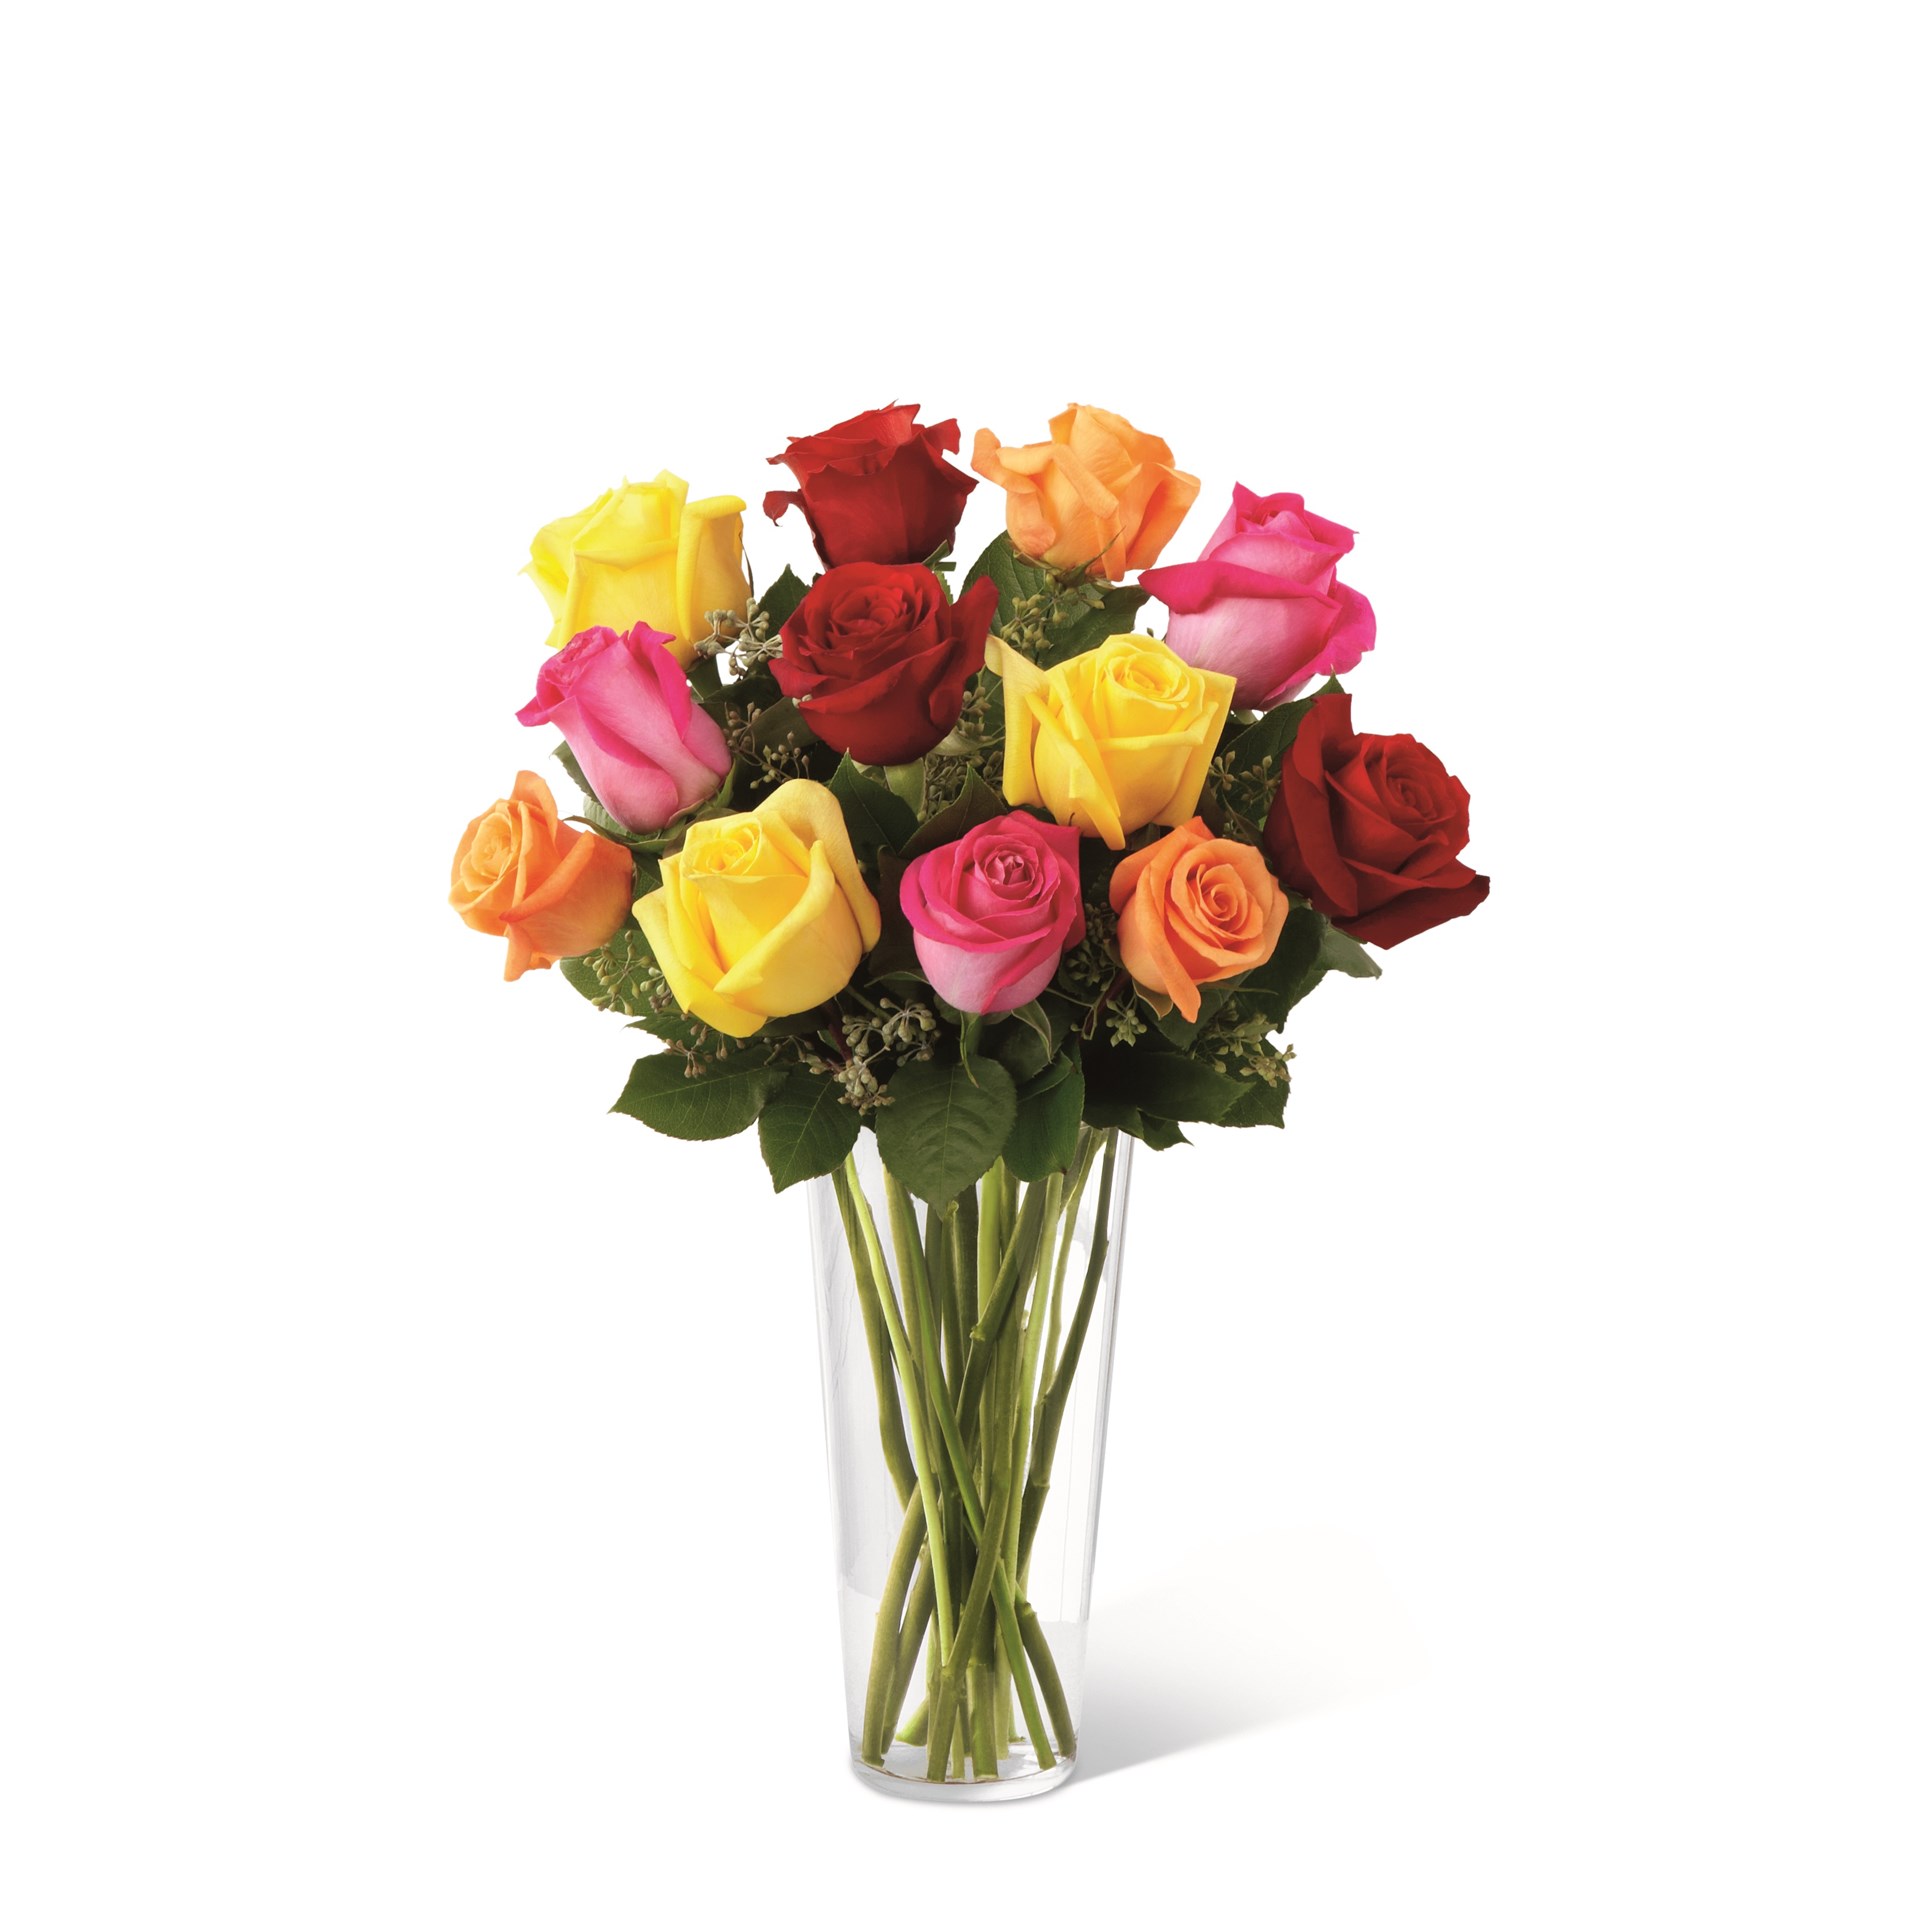 product image for The FTD Bright Spark Rose Bouquet